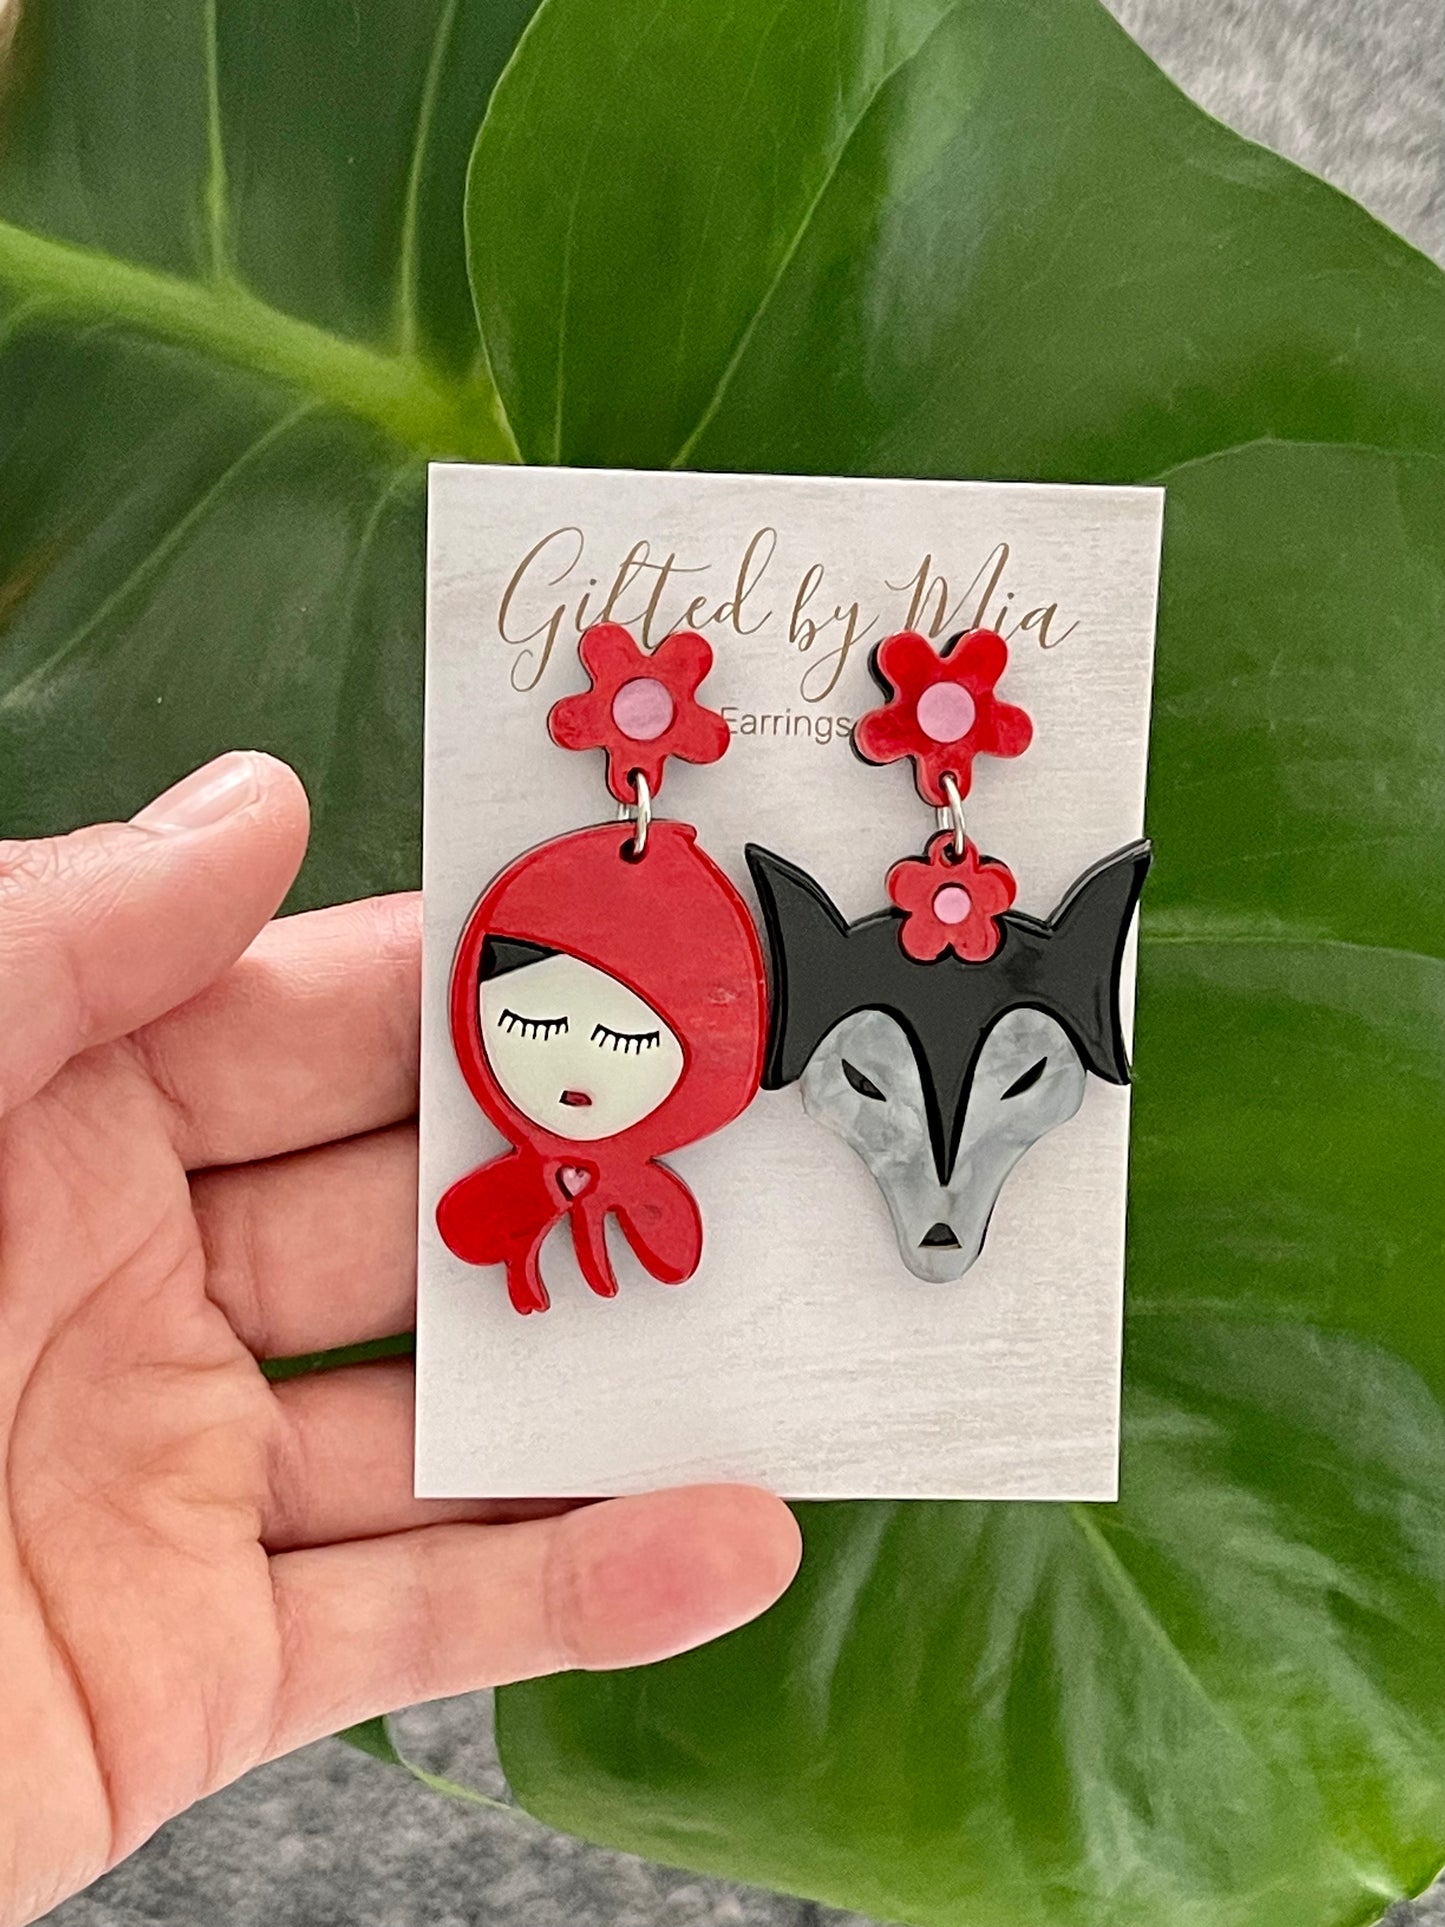 Acrylic Mismatched Red Riding Hood Novelty Earrings